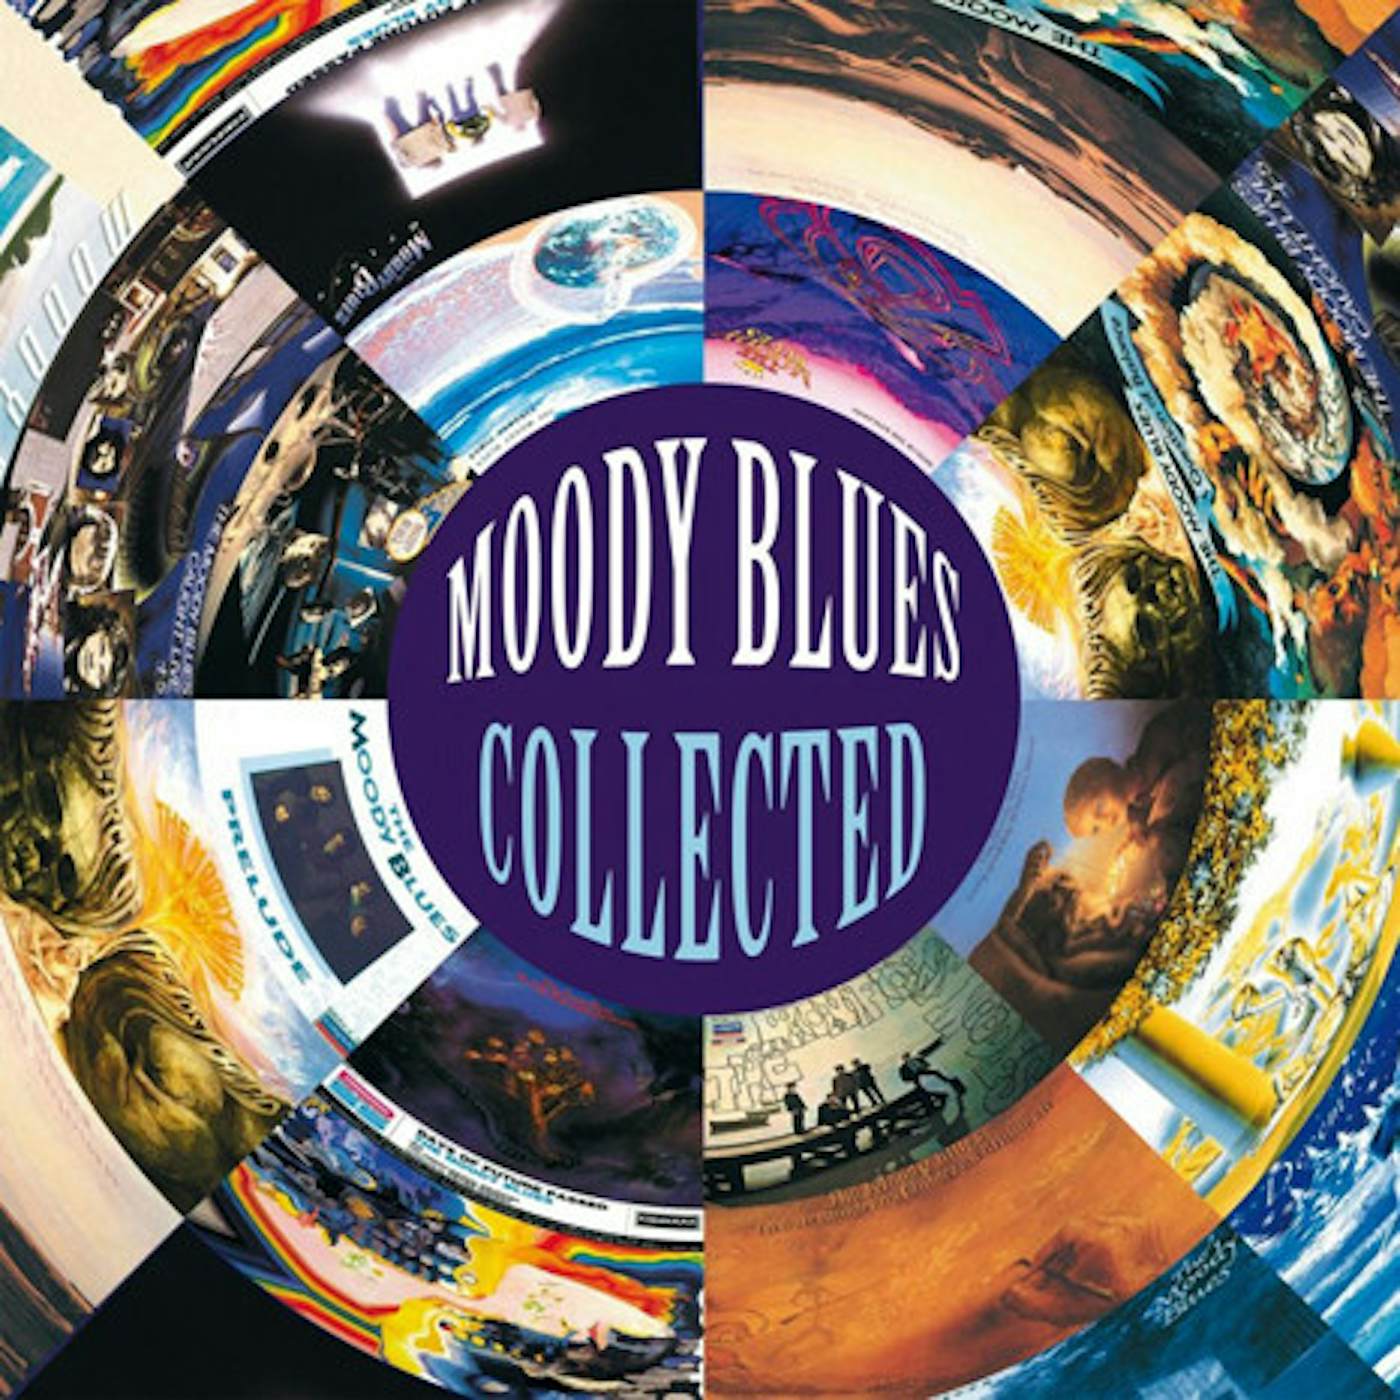 The Moody Blues Collected Vinyl Record